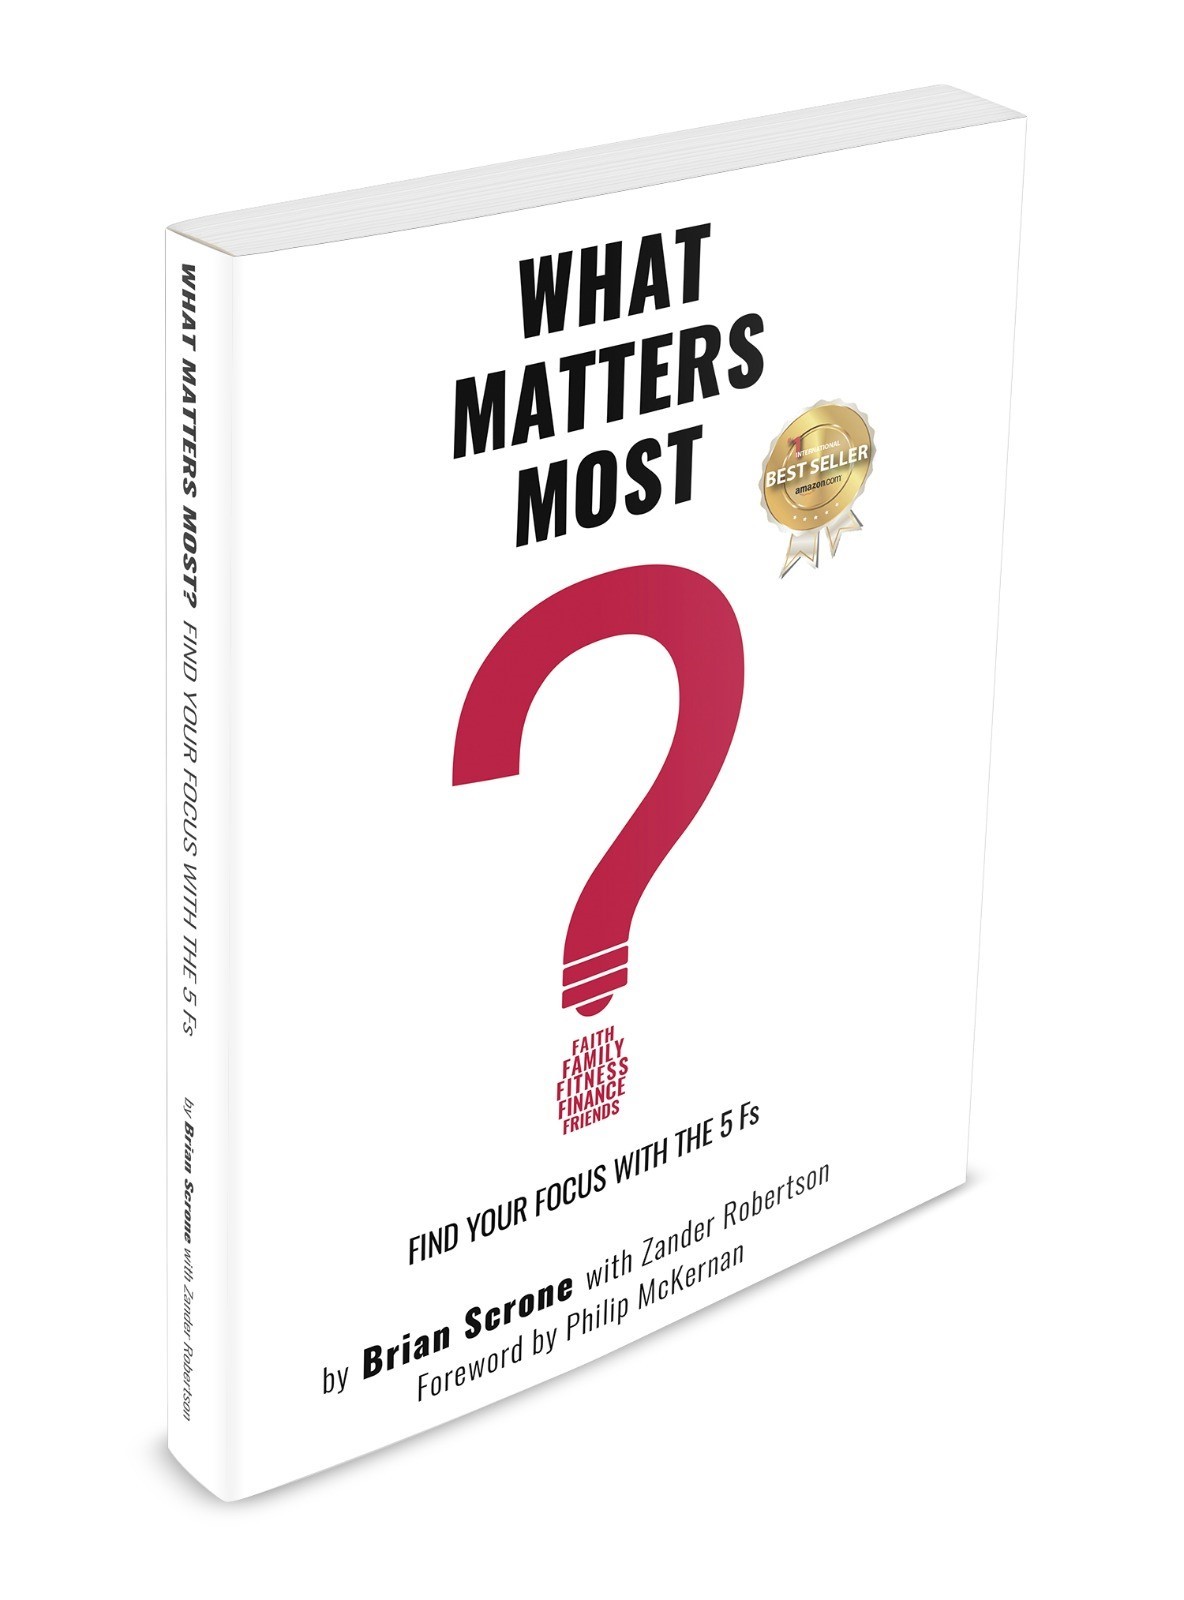 “What Matters Most” is available on Amazon for $14.99.